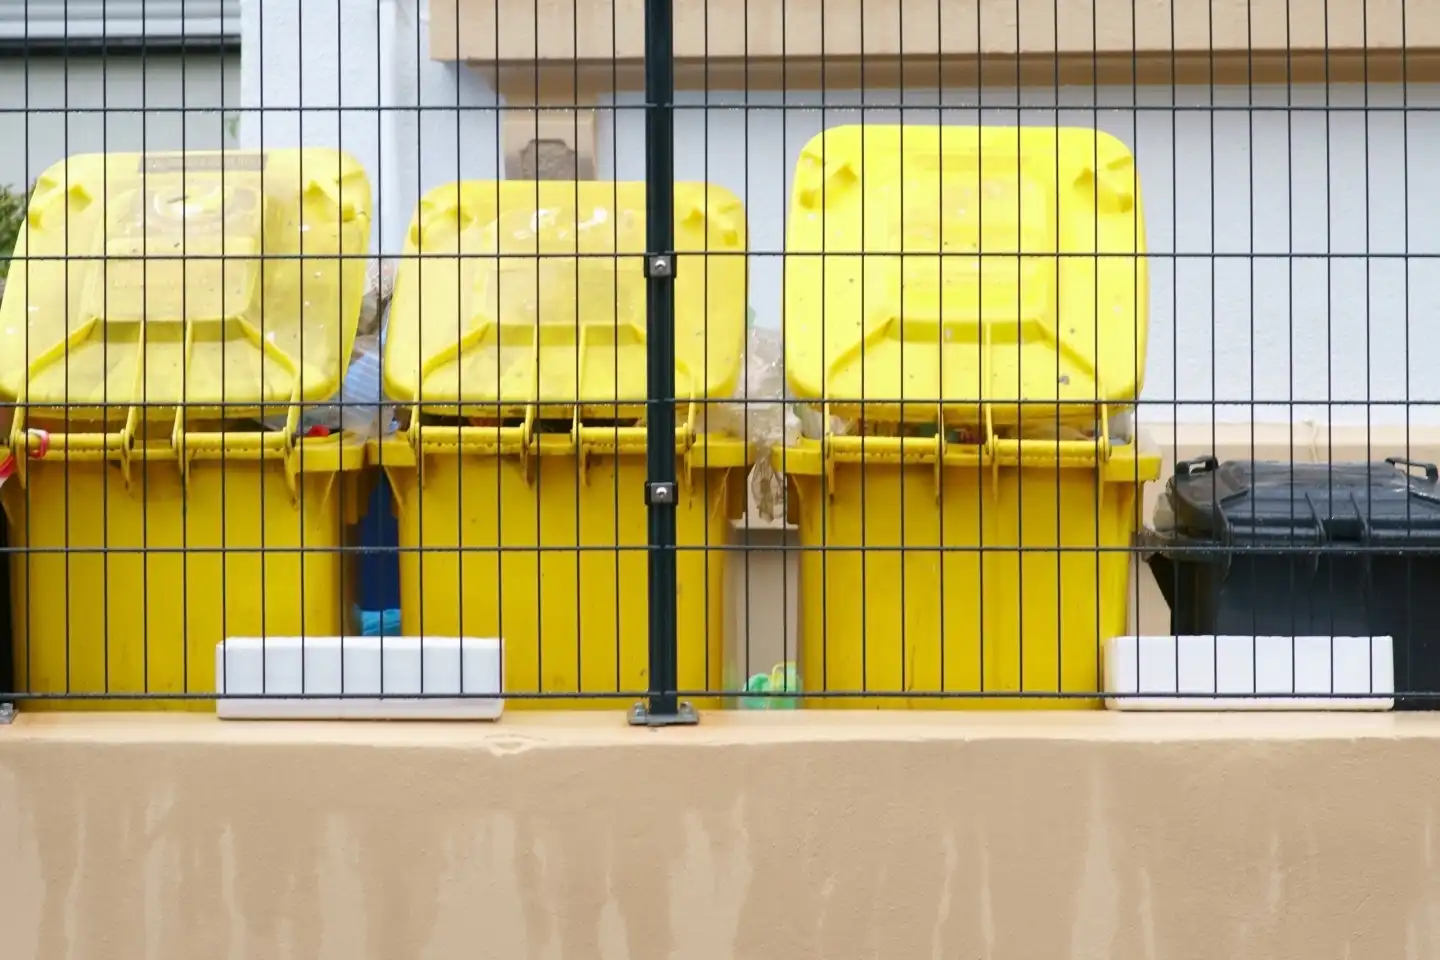 Yellow garbage cans